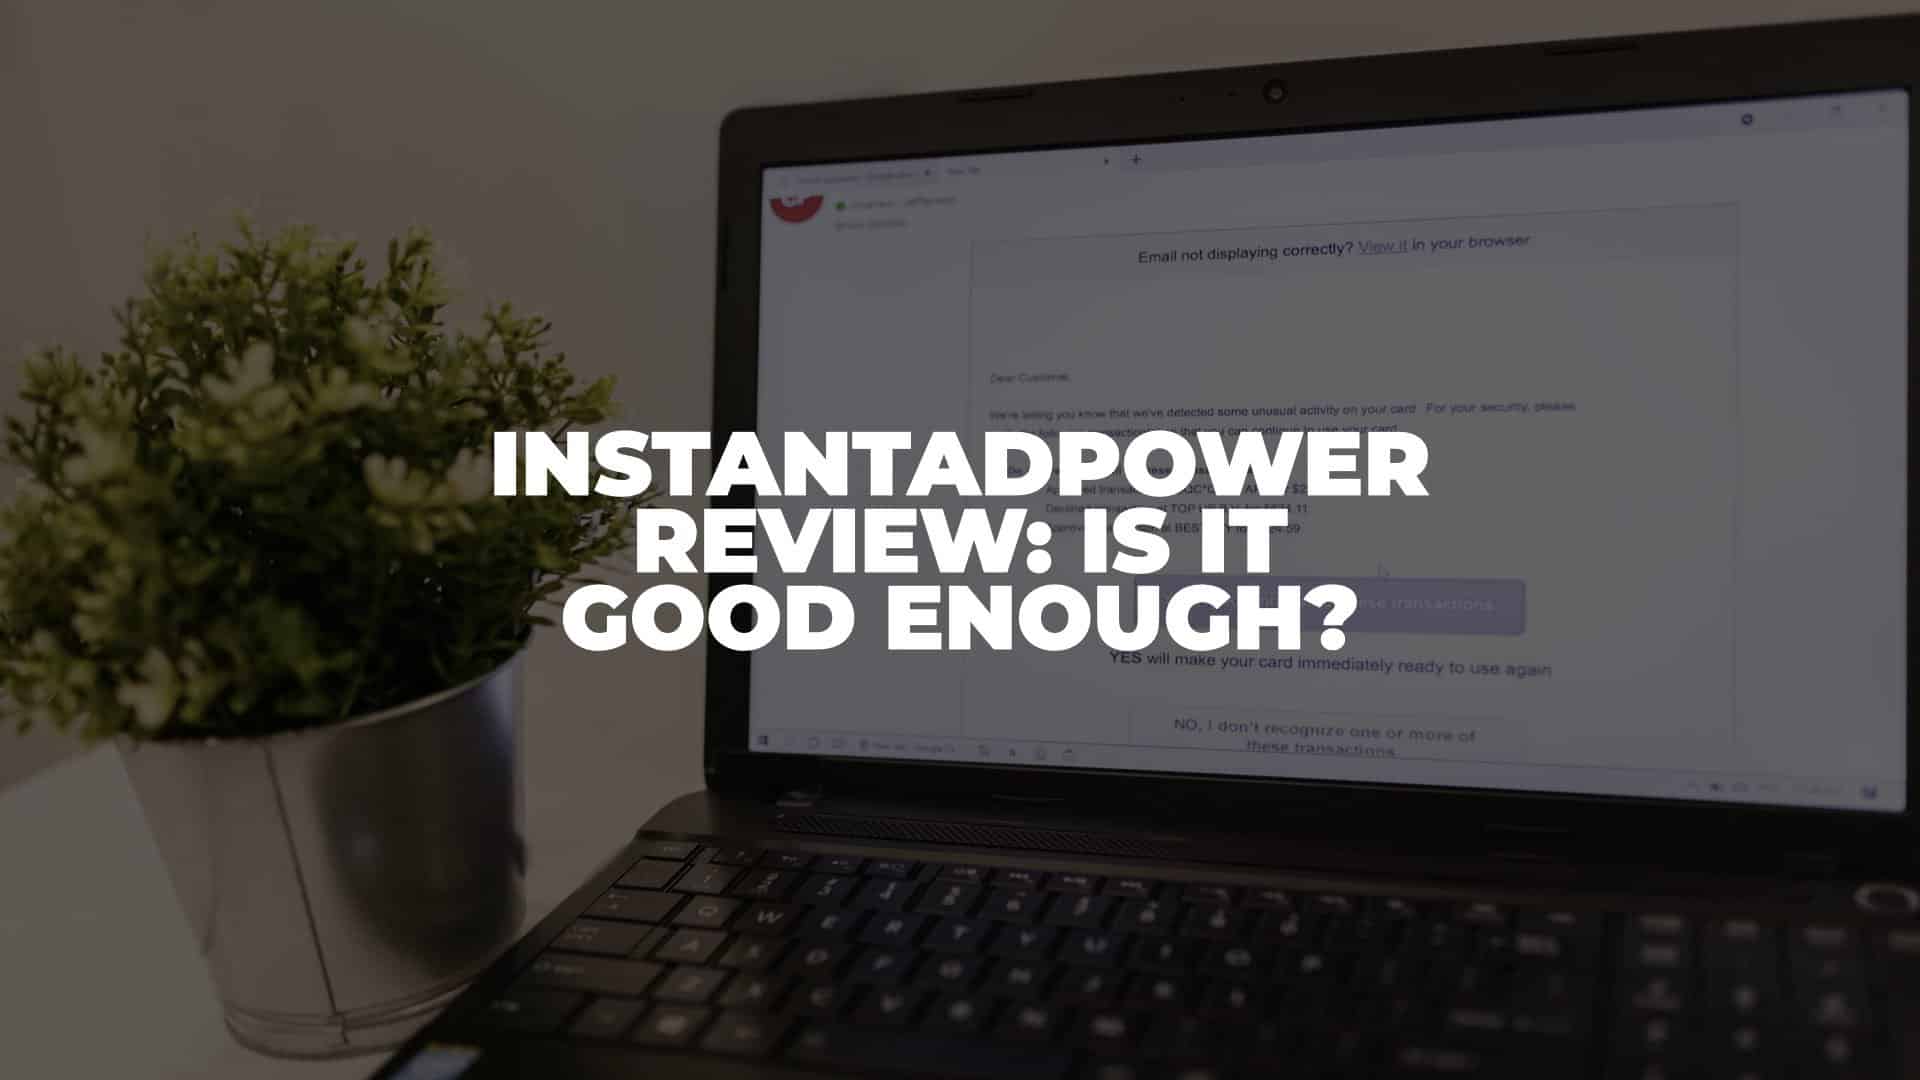 InstantAdPower Review - Featured Image